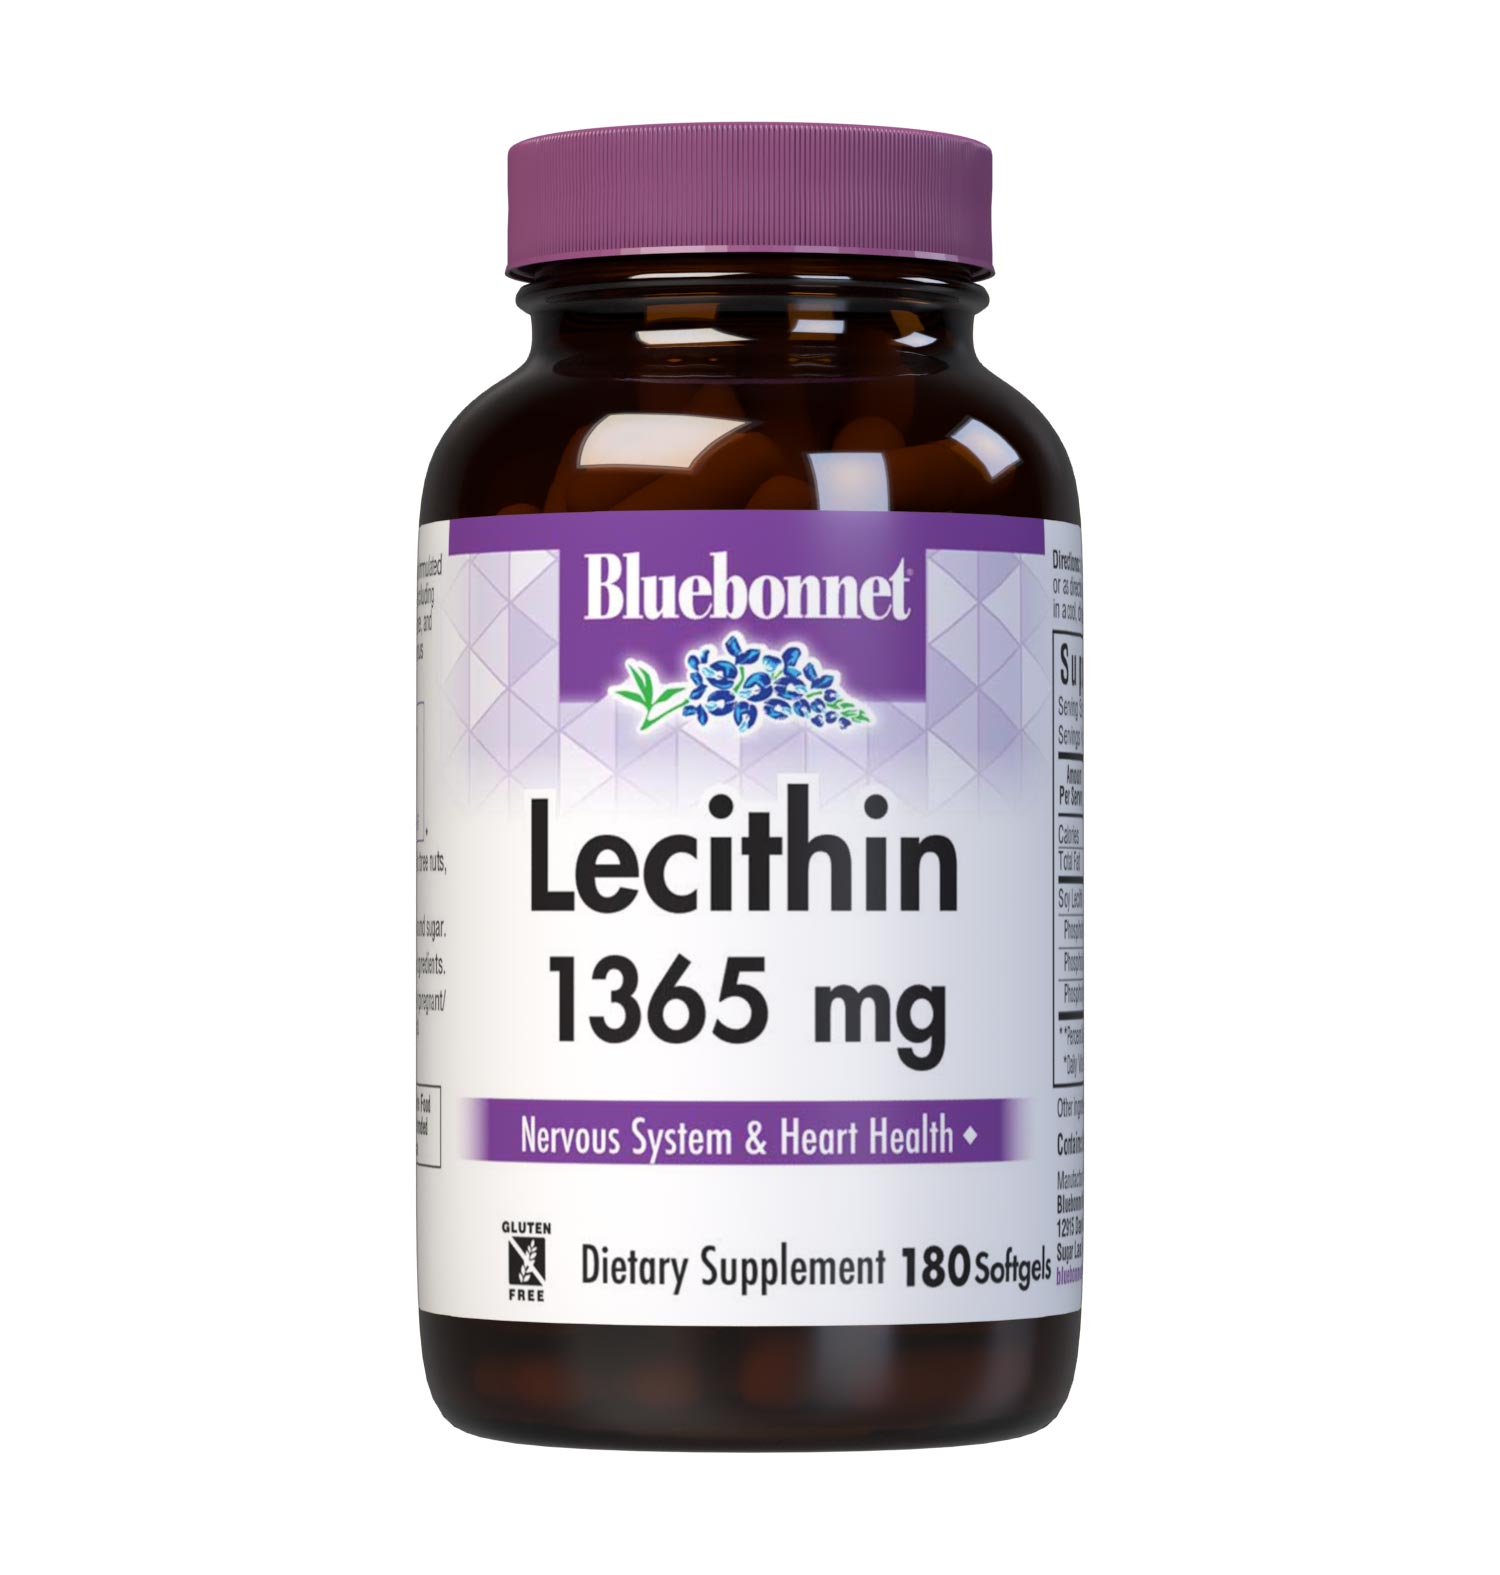 Bluebonnet’s Lecithin 1365 mg 180 Softgels are formulated with soy lecithin, a source of phospholipids including phosphatidylcholine, phosphatidylethanolamine, and phosphatidylinositol to help support the nervous system and cardiovascular health. #size_180 count